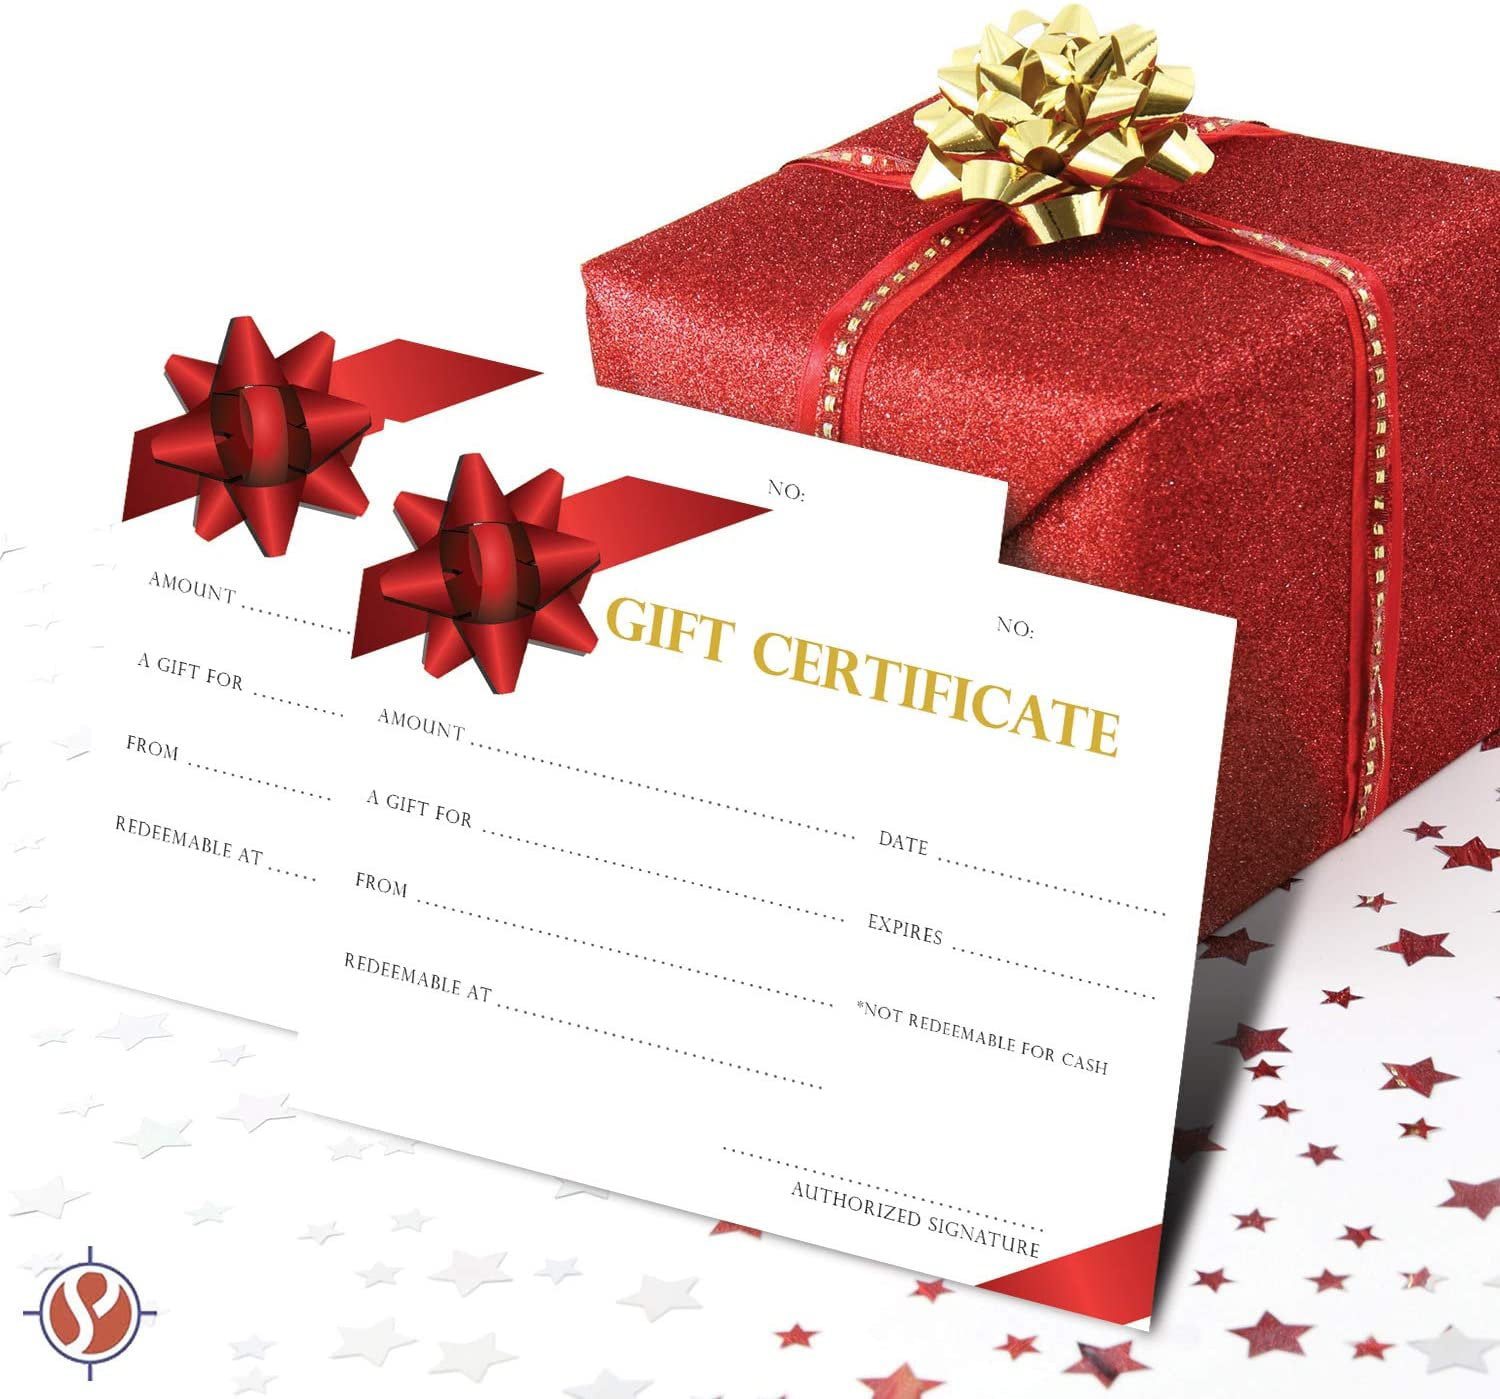 Rustic Generic Gift Certificates Holiday Gift Cards Blank 25 Blank Gift Certificates for Business Supplies Paper Gift Certificates Blank Coupons 4X9 Inch Blank Gift Cards for Spa Gift Vouchers